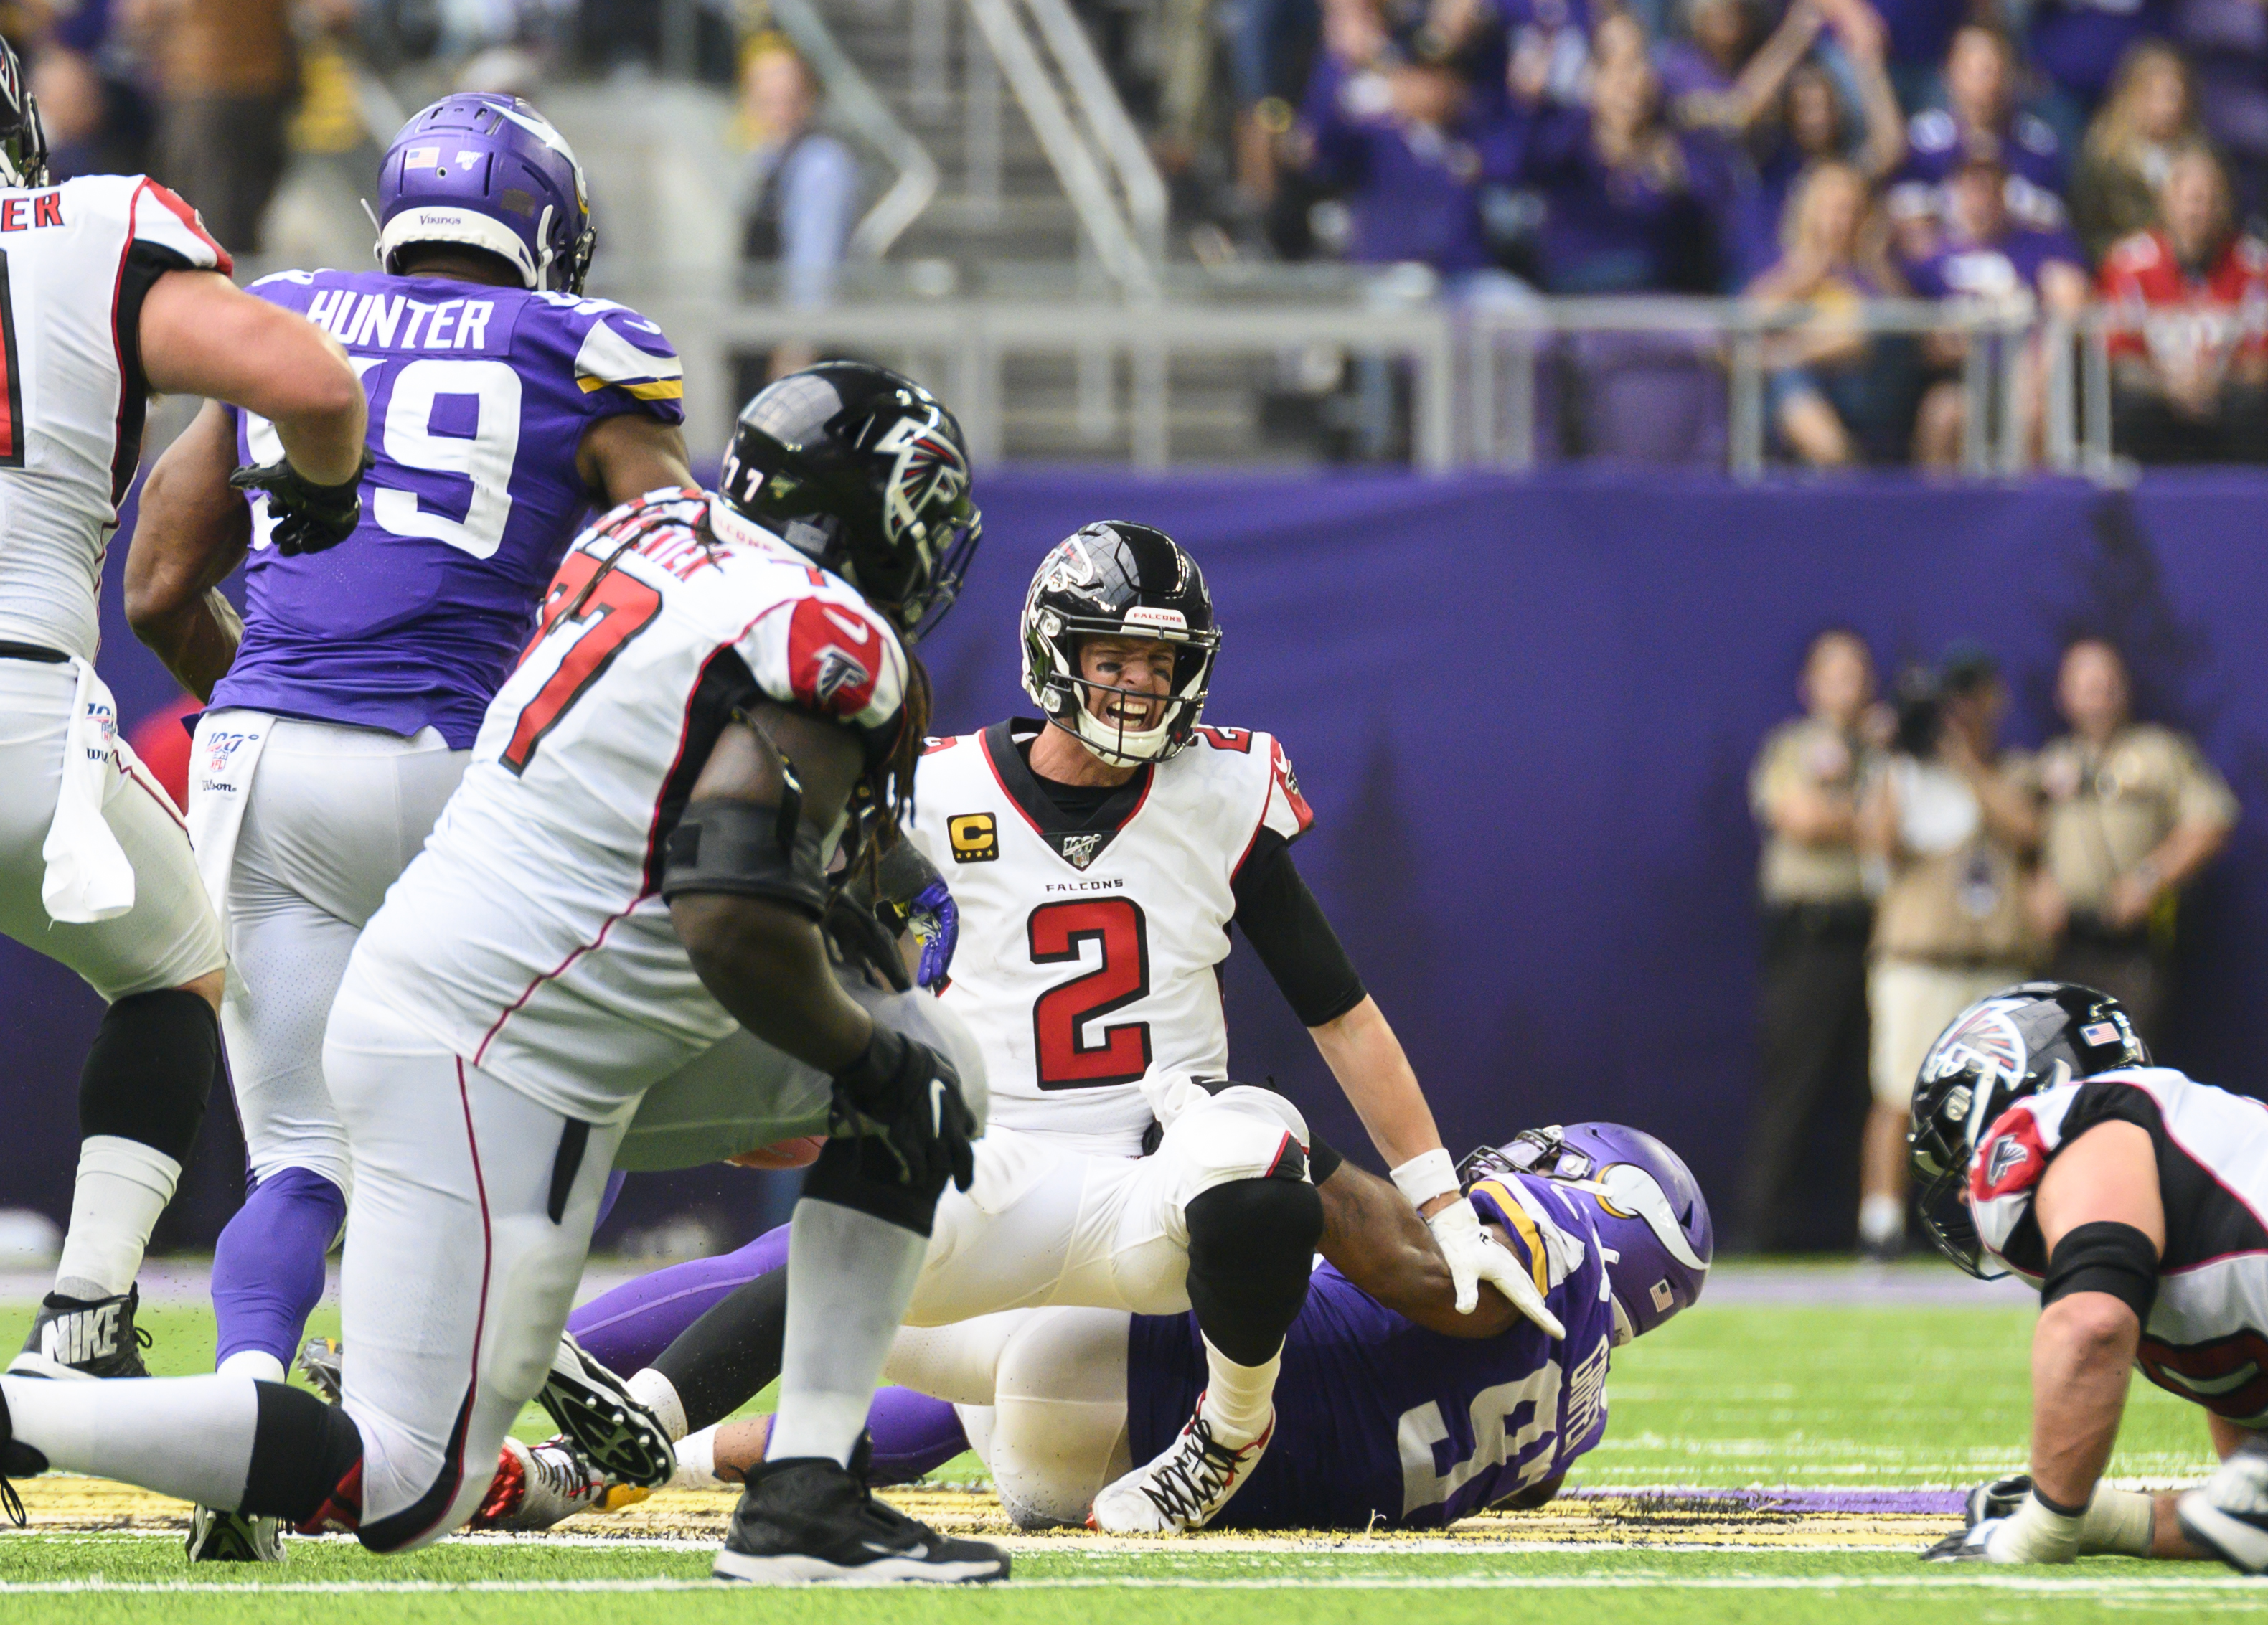 For openers, the Falcons unleash a stink bomb